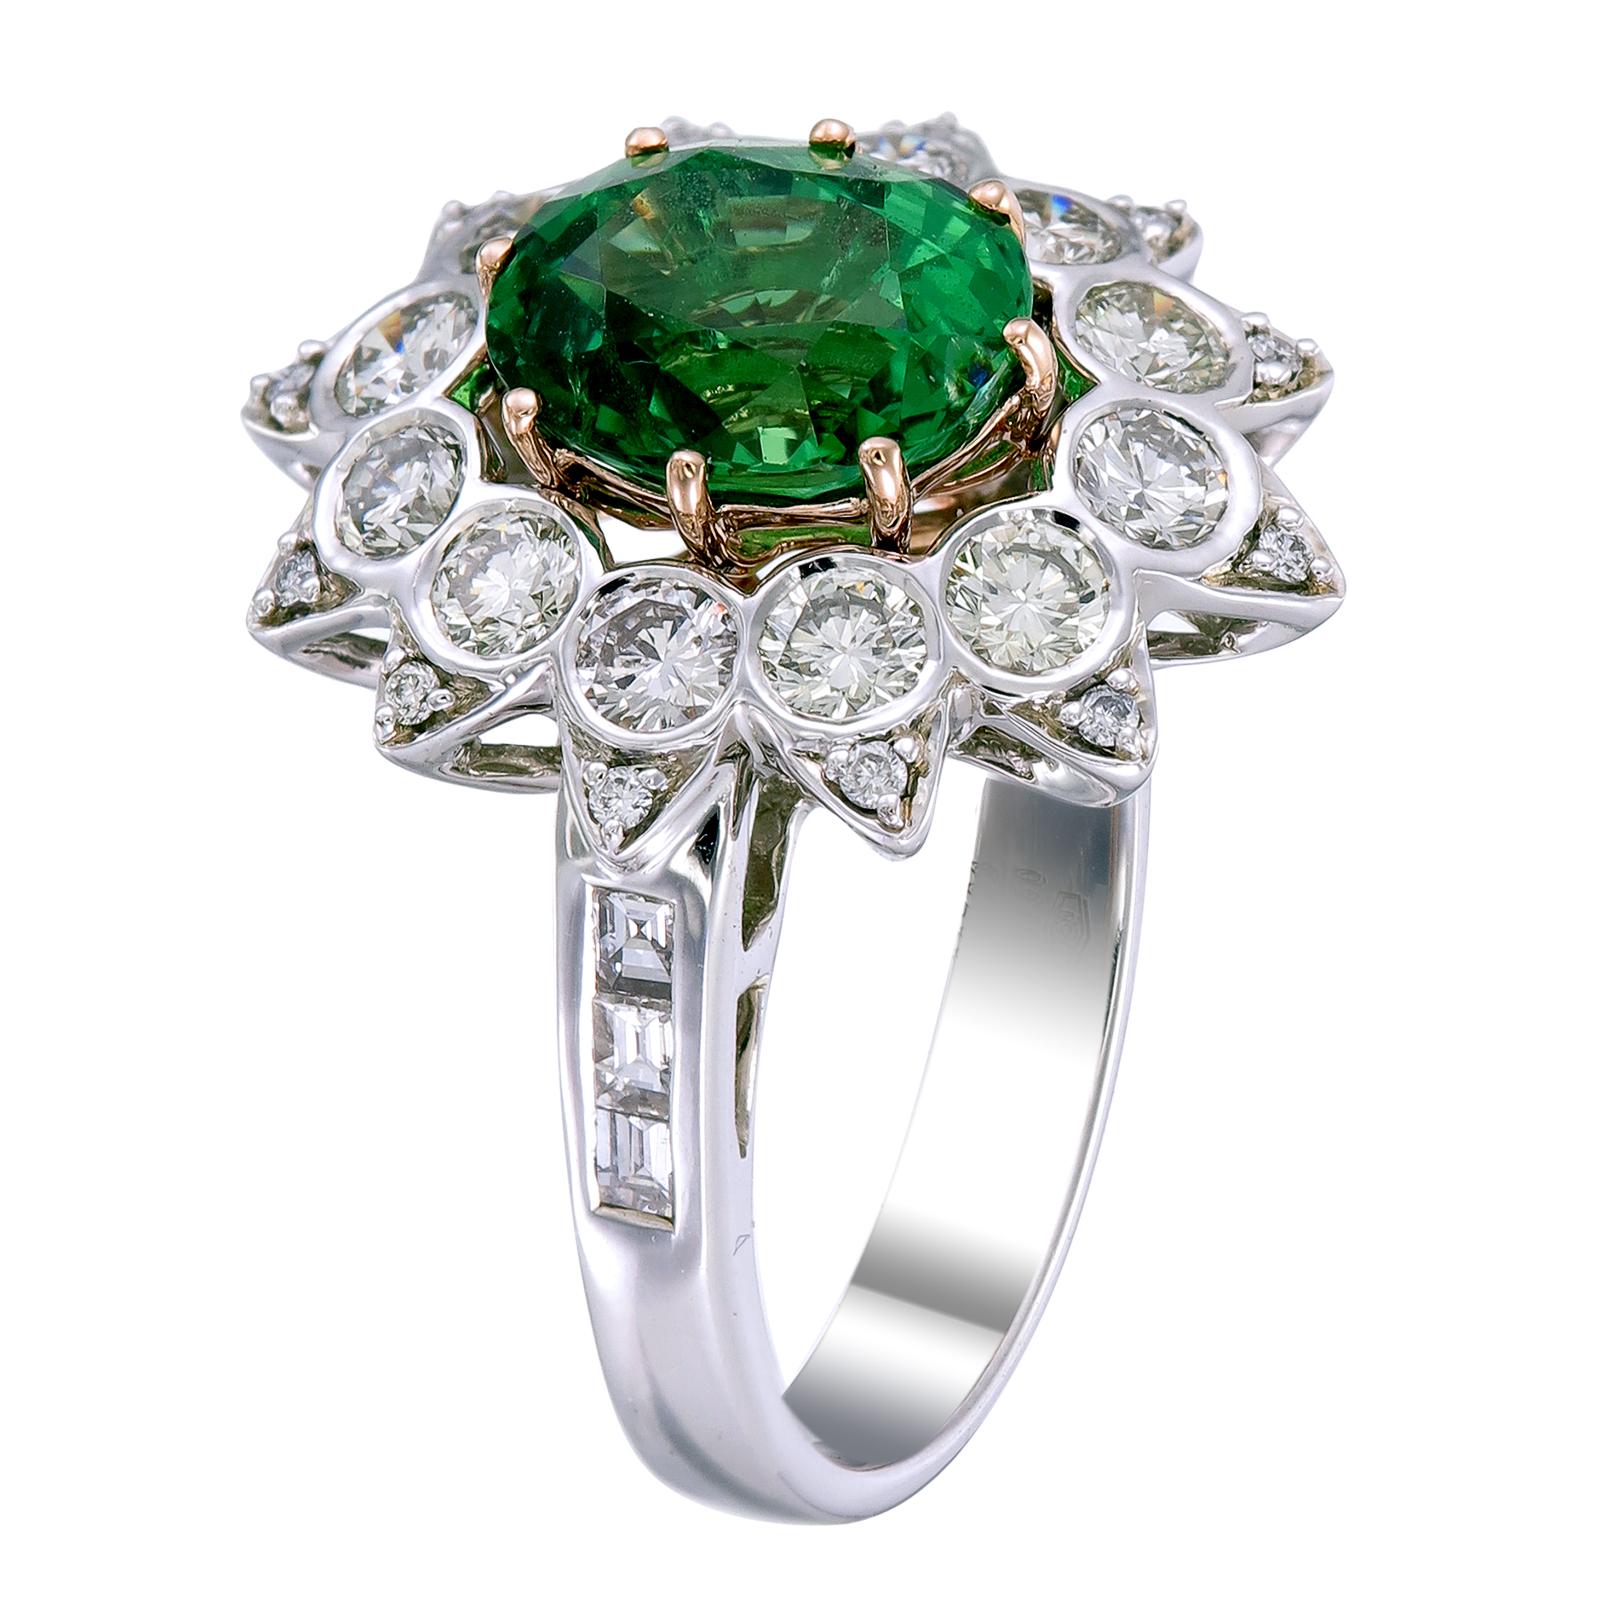 Green is the color of life and this ring centered with a 3.16-carat dark hued tsavorite gives this jewel a natural energy as well as lifelong beauty. The main gem is surrounded by 1.41-carat round diamonds and further enhanced with smaller diamonds